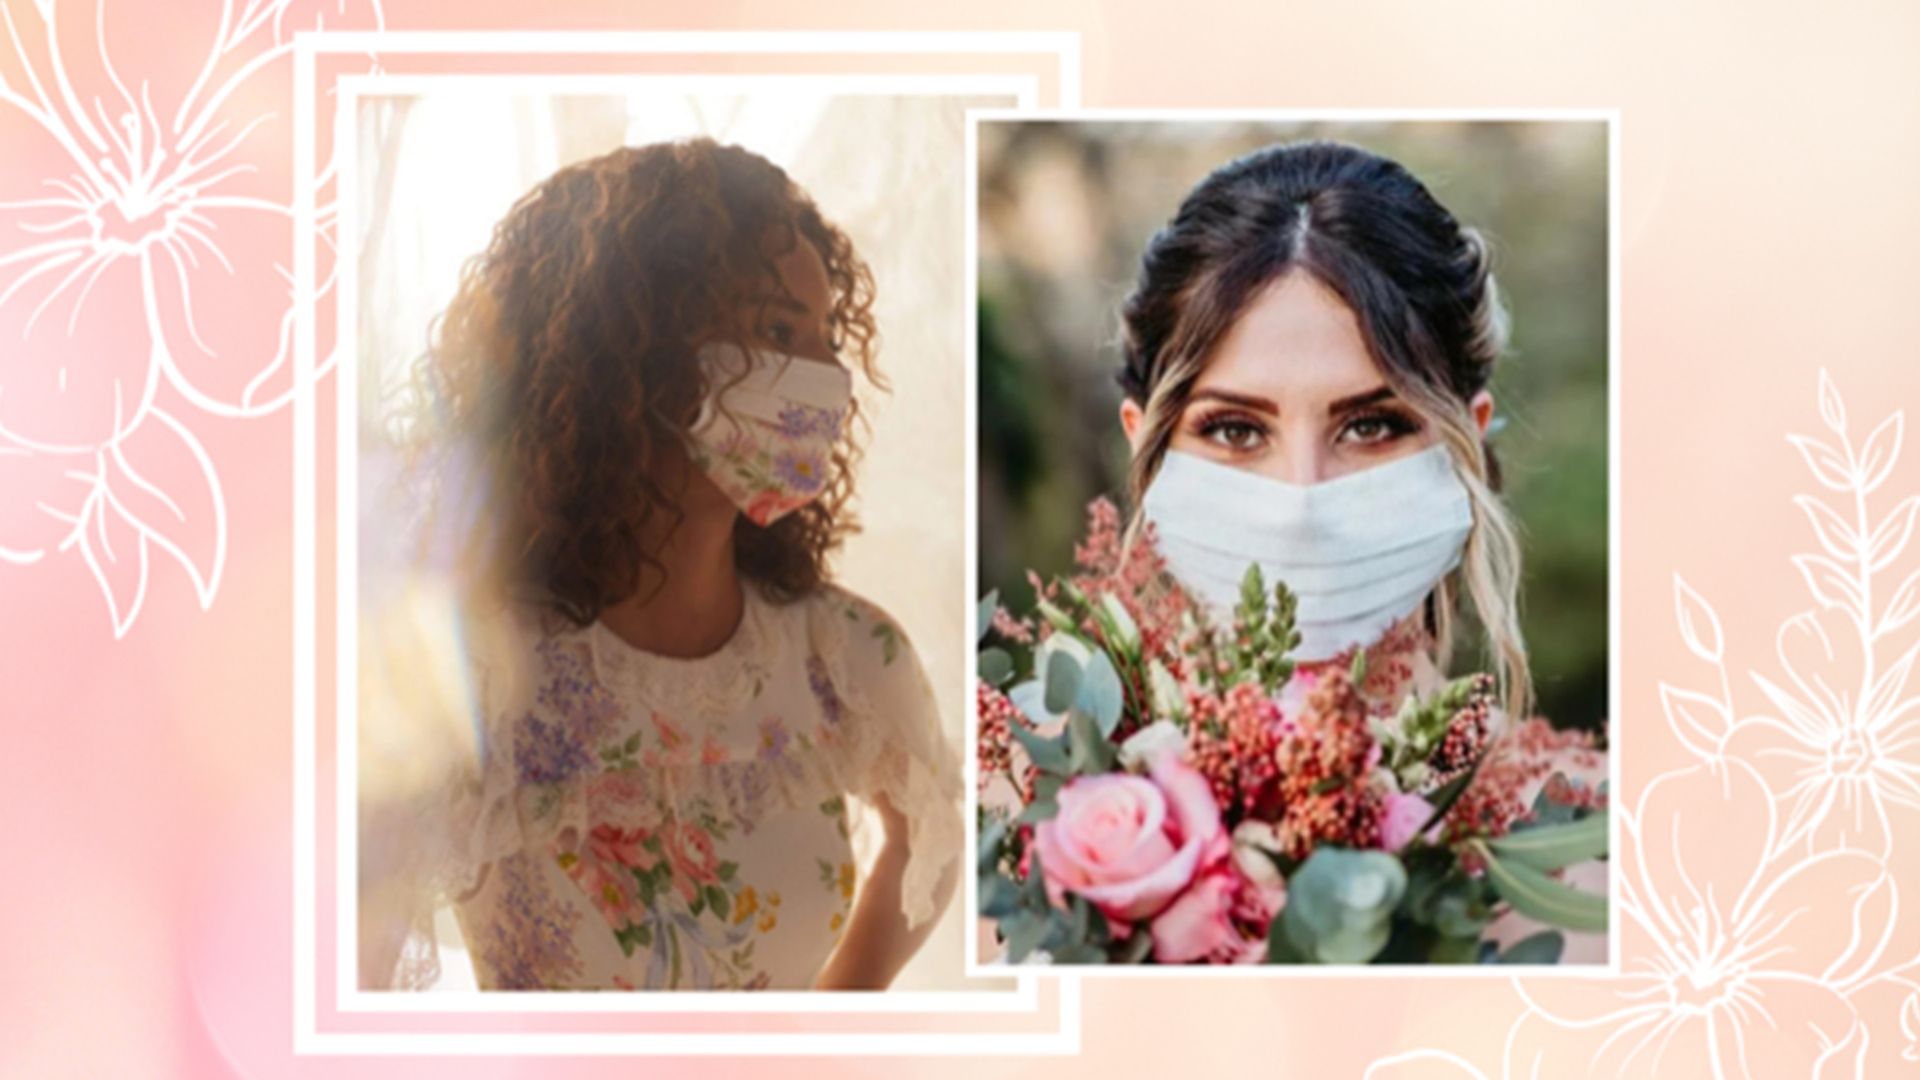 23 stylish wedding face masks and coverings to say 'I do' to